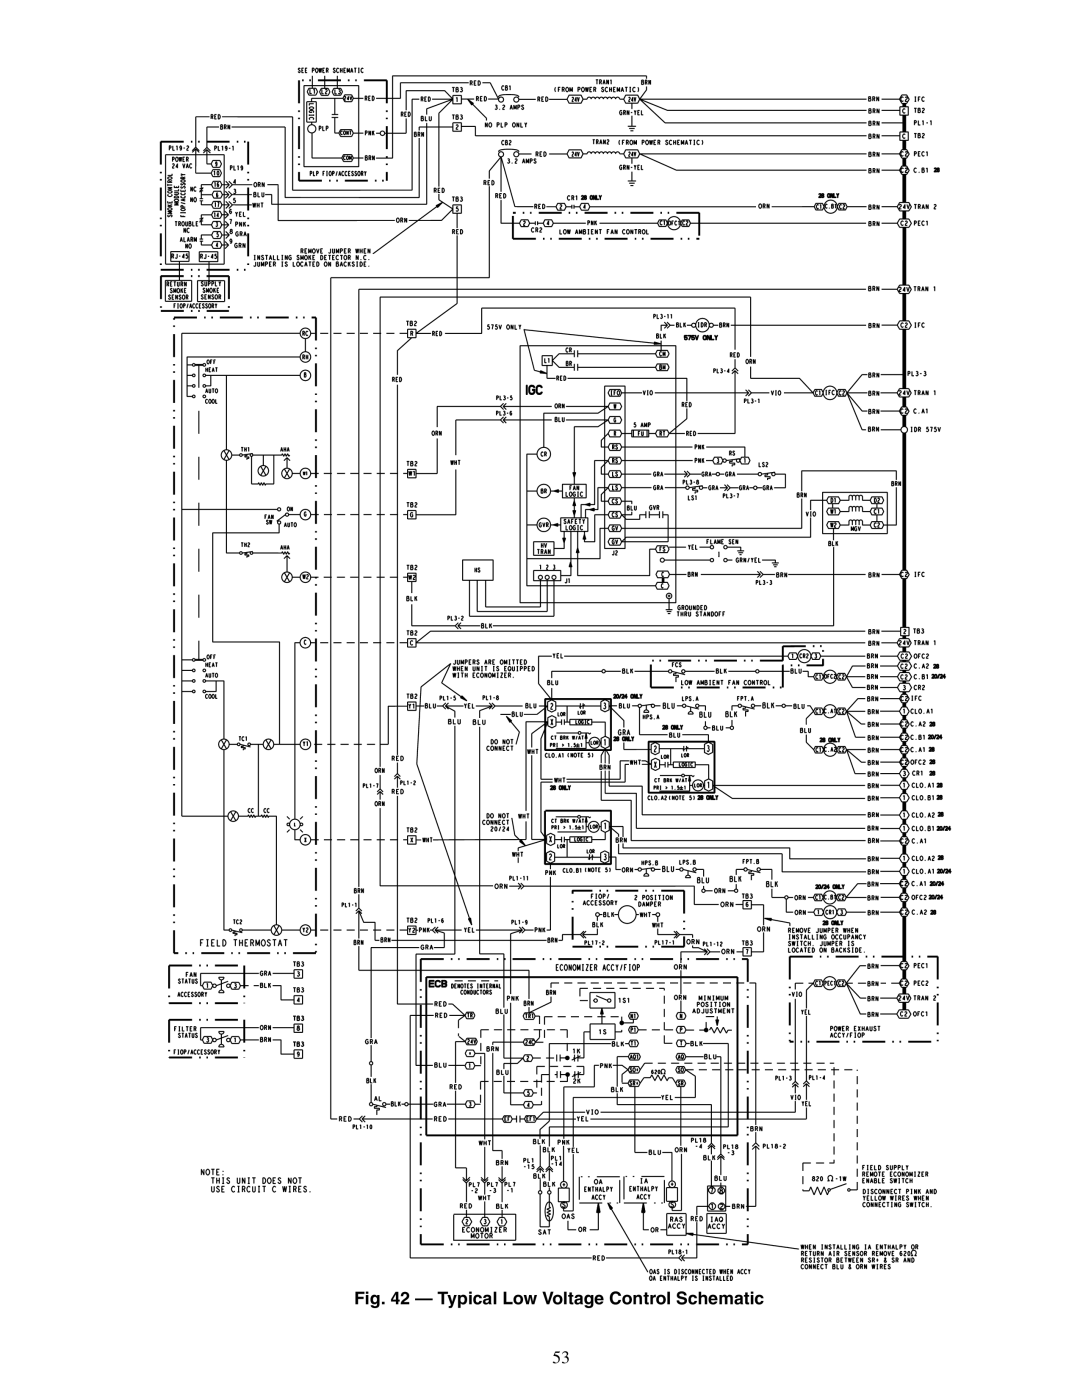 Carrier 48PG20-28 specifications Typical Low Voltage Control Schematic 